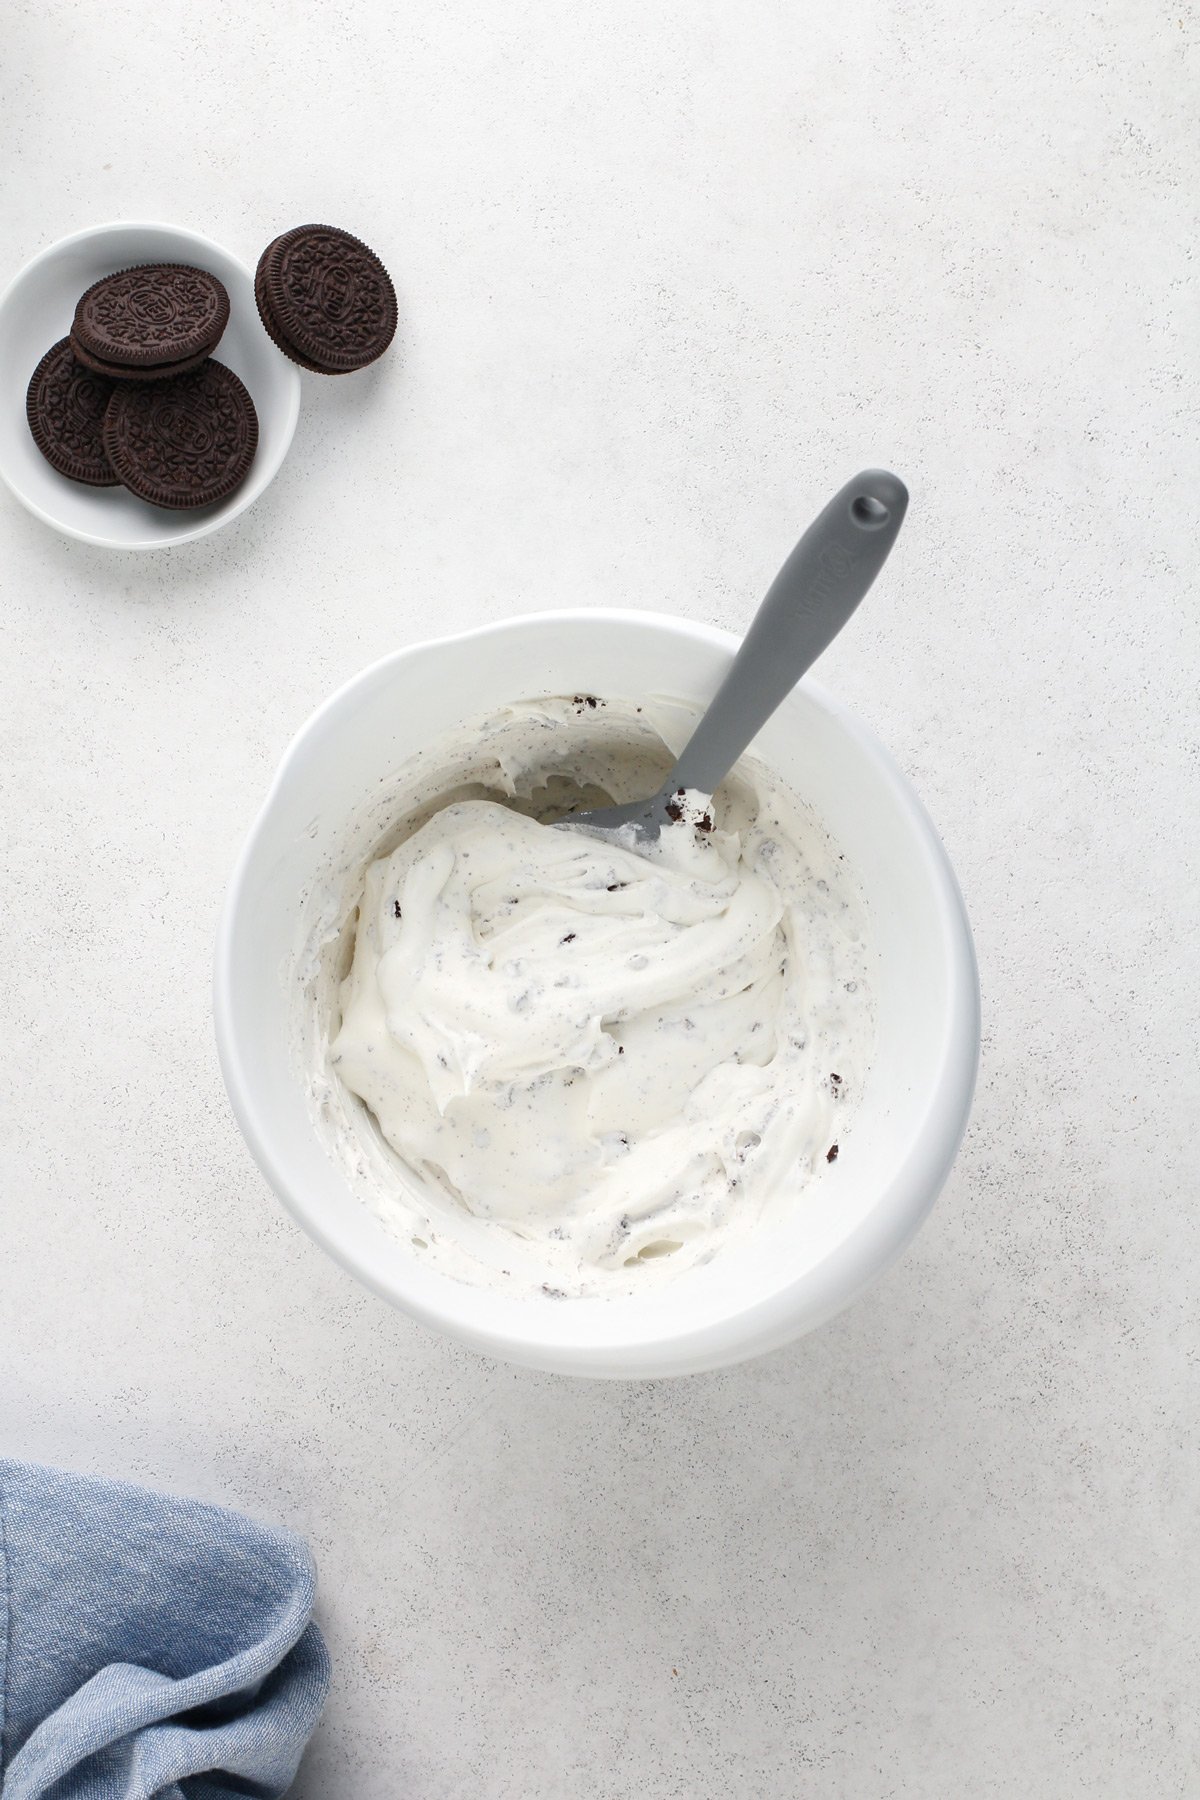 Chopped oreos folded into whipped topping in a white mixing bowl.